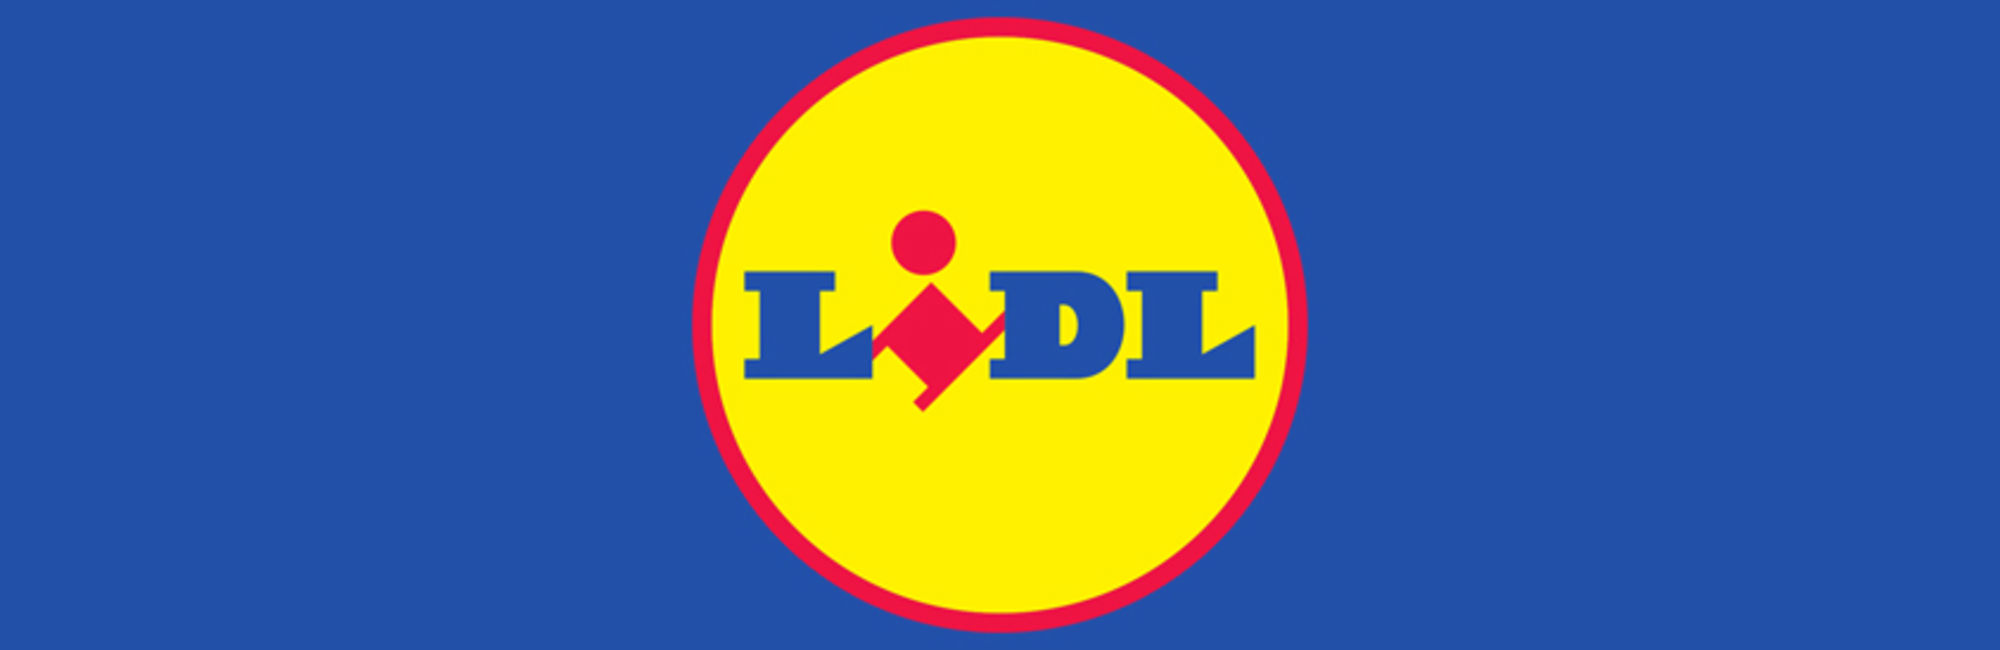 lidl-ireland-recycling-ministerbruton-bruton-climate-instore-store-dublin-sustainability